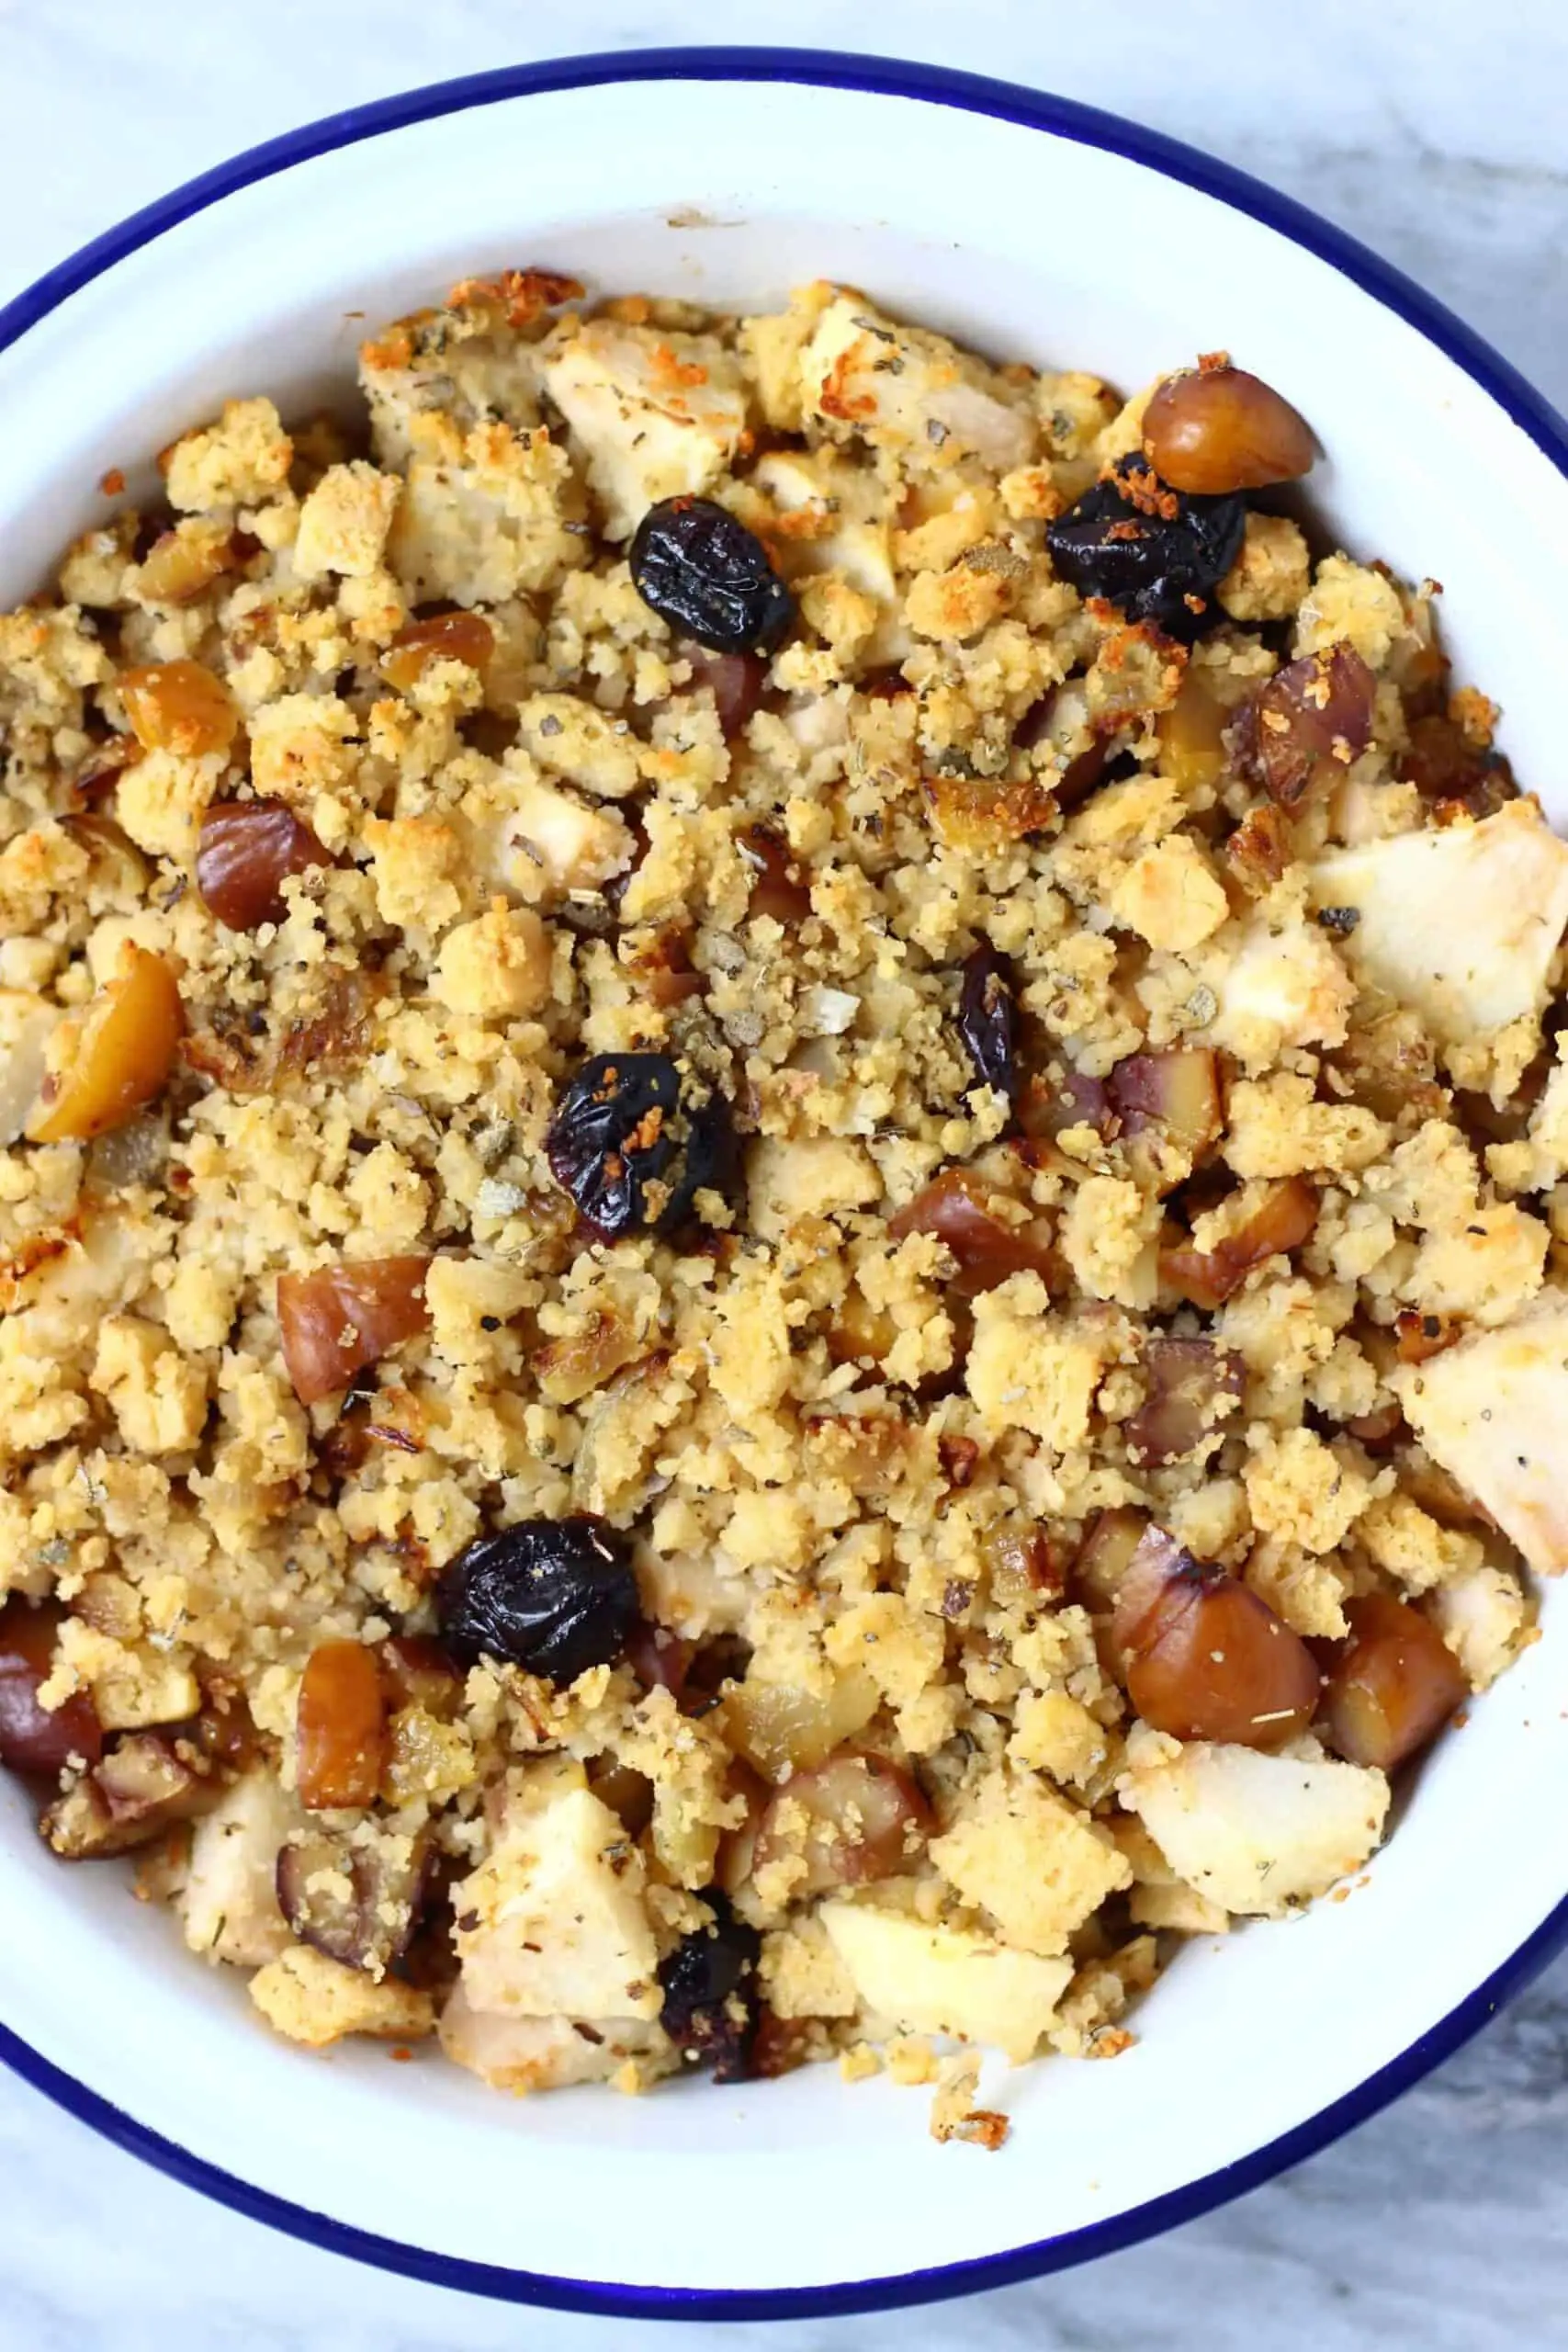 Gluten-free vegan stuffing with apple, dried cherries and chestnuts in a pie dish